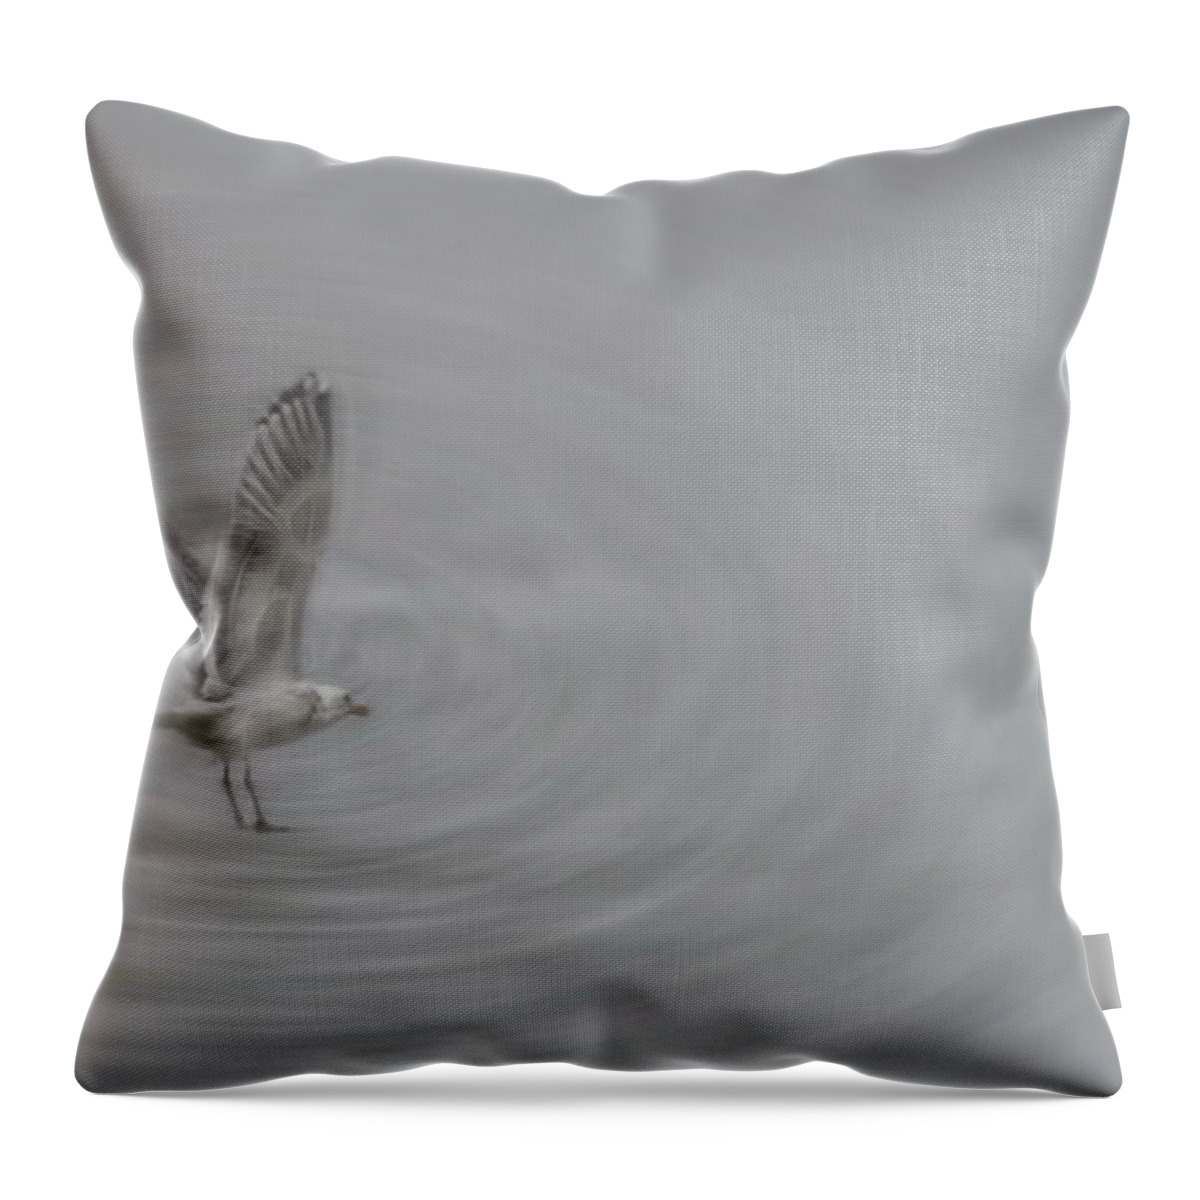 Gull Throw Pillow featuring the photograph Gull Vortex by Beth Sawickie